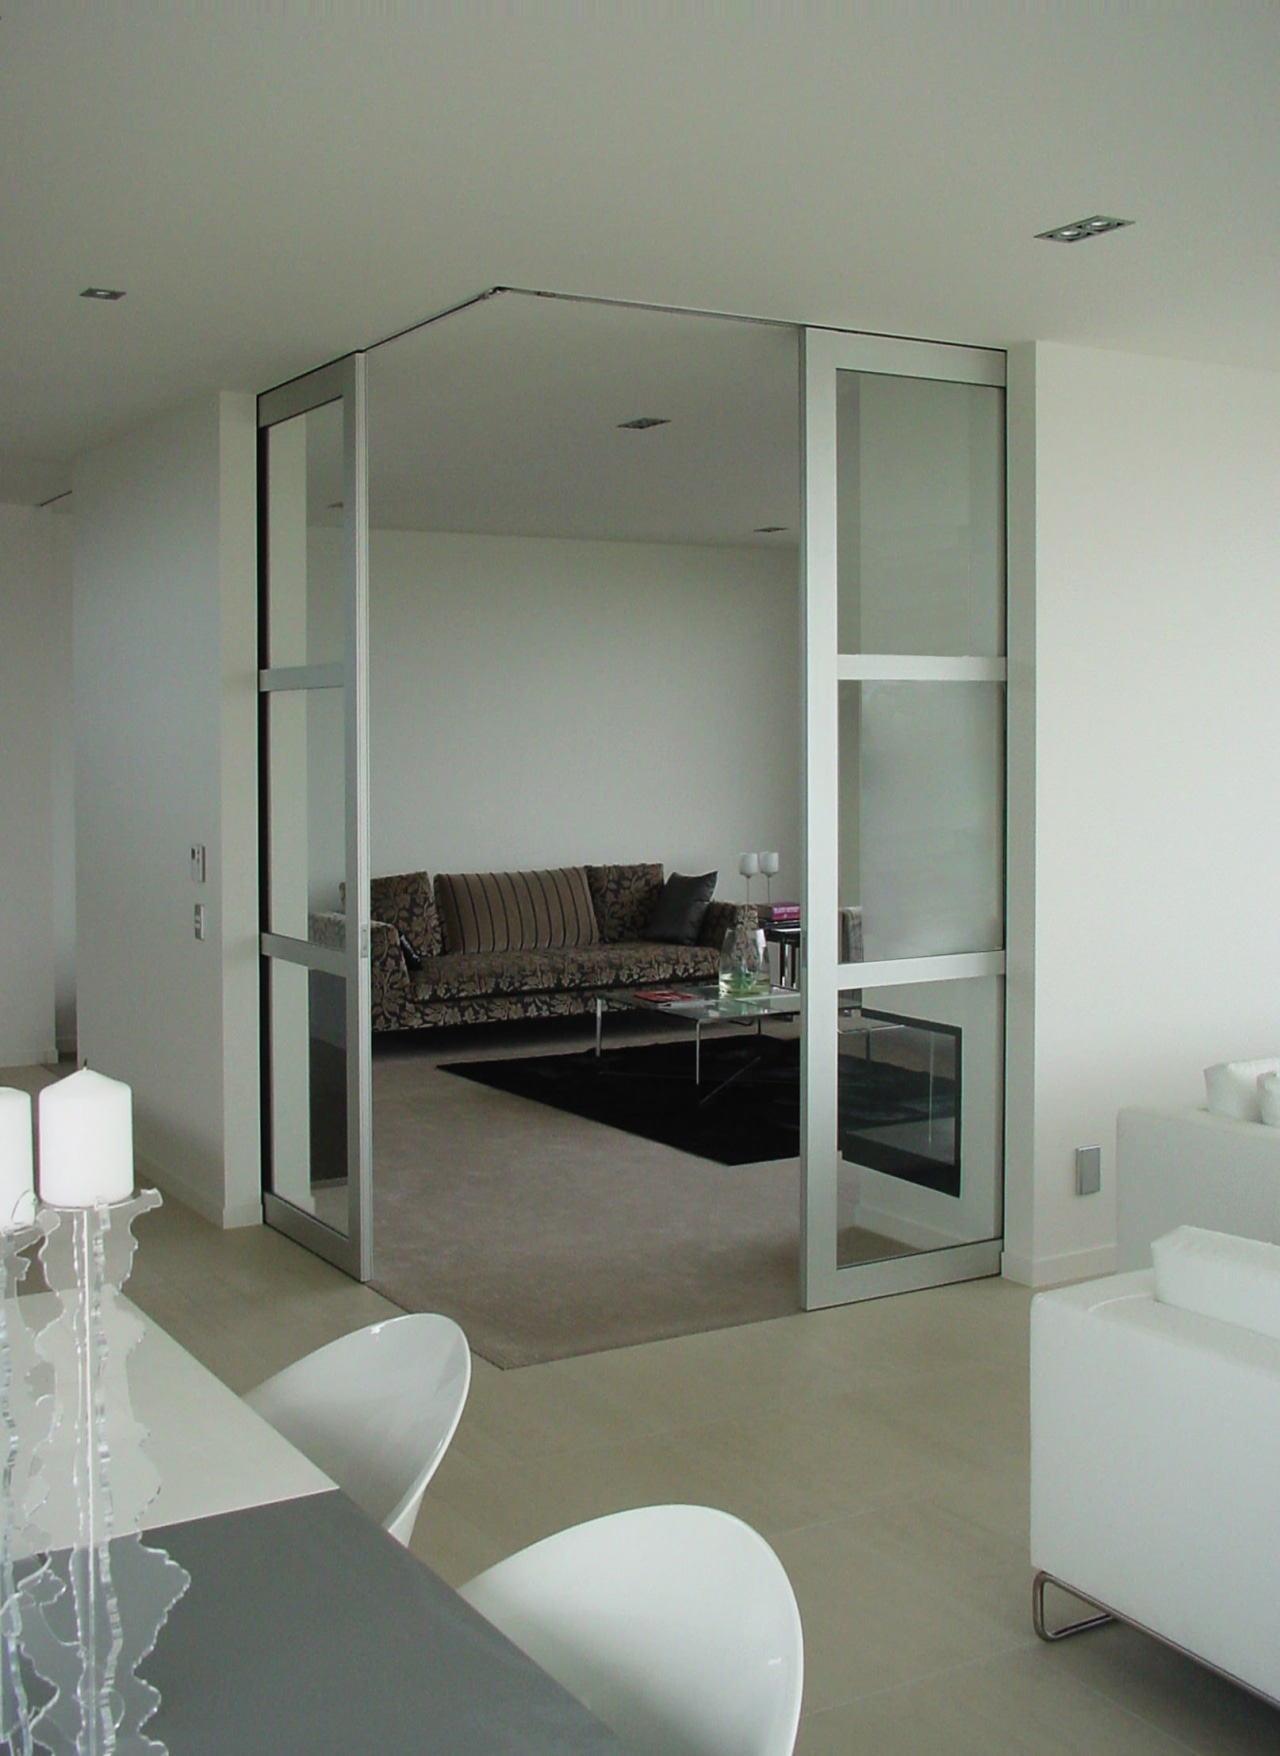 Interior view of an apartment which features a architecture, door, floor, glass, house, interior design, window, gray